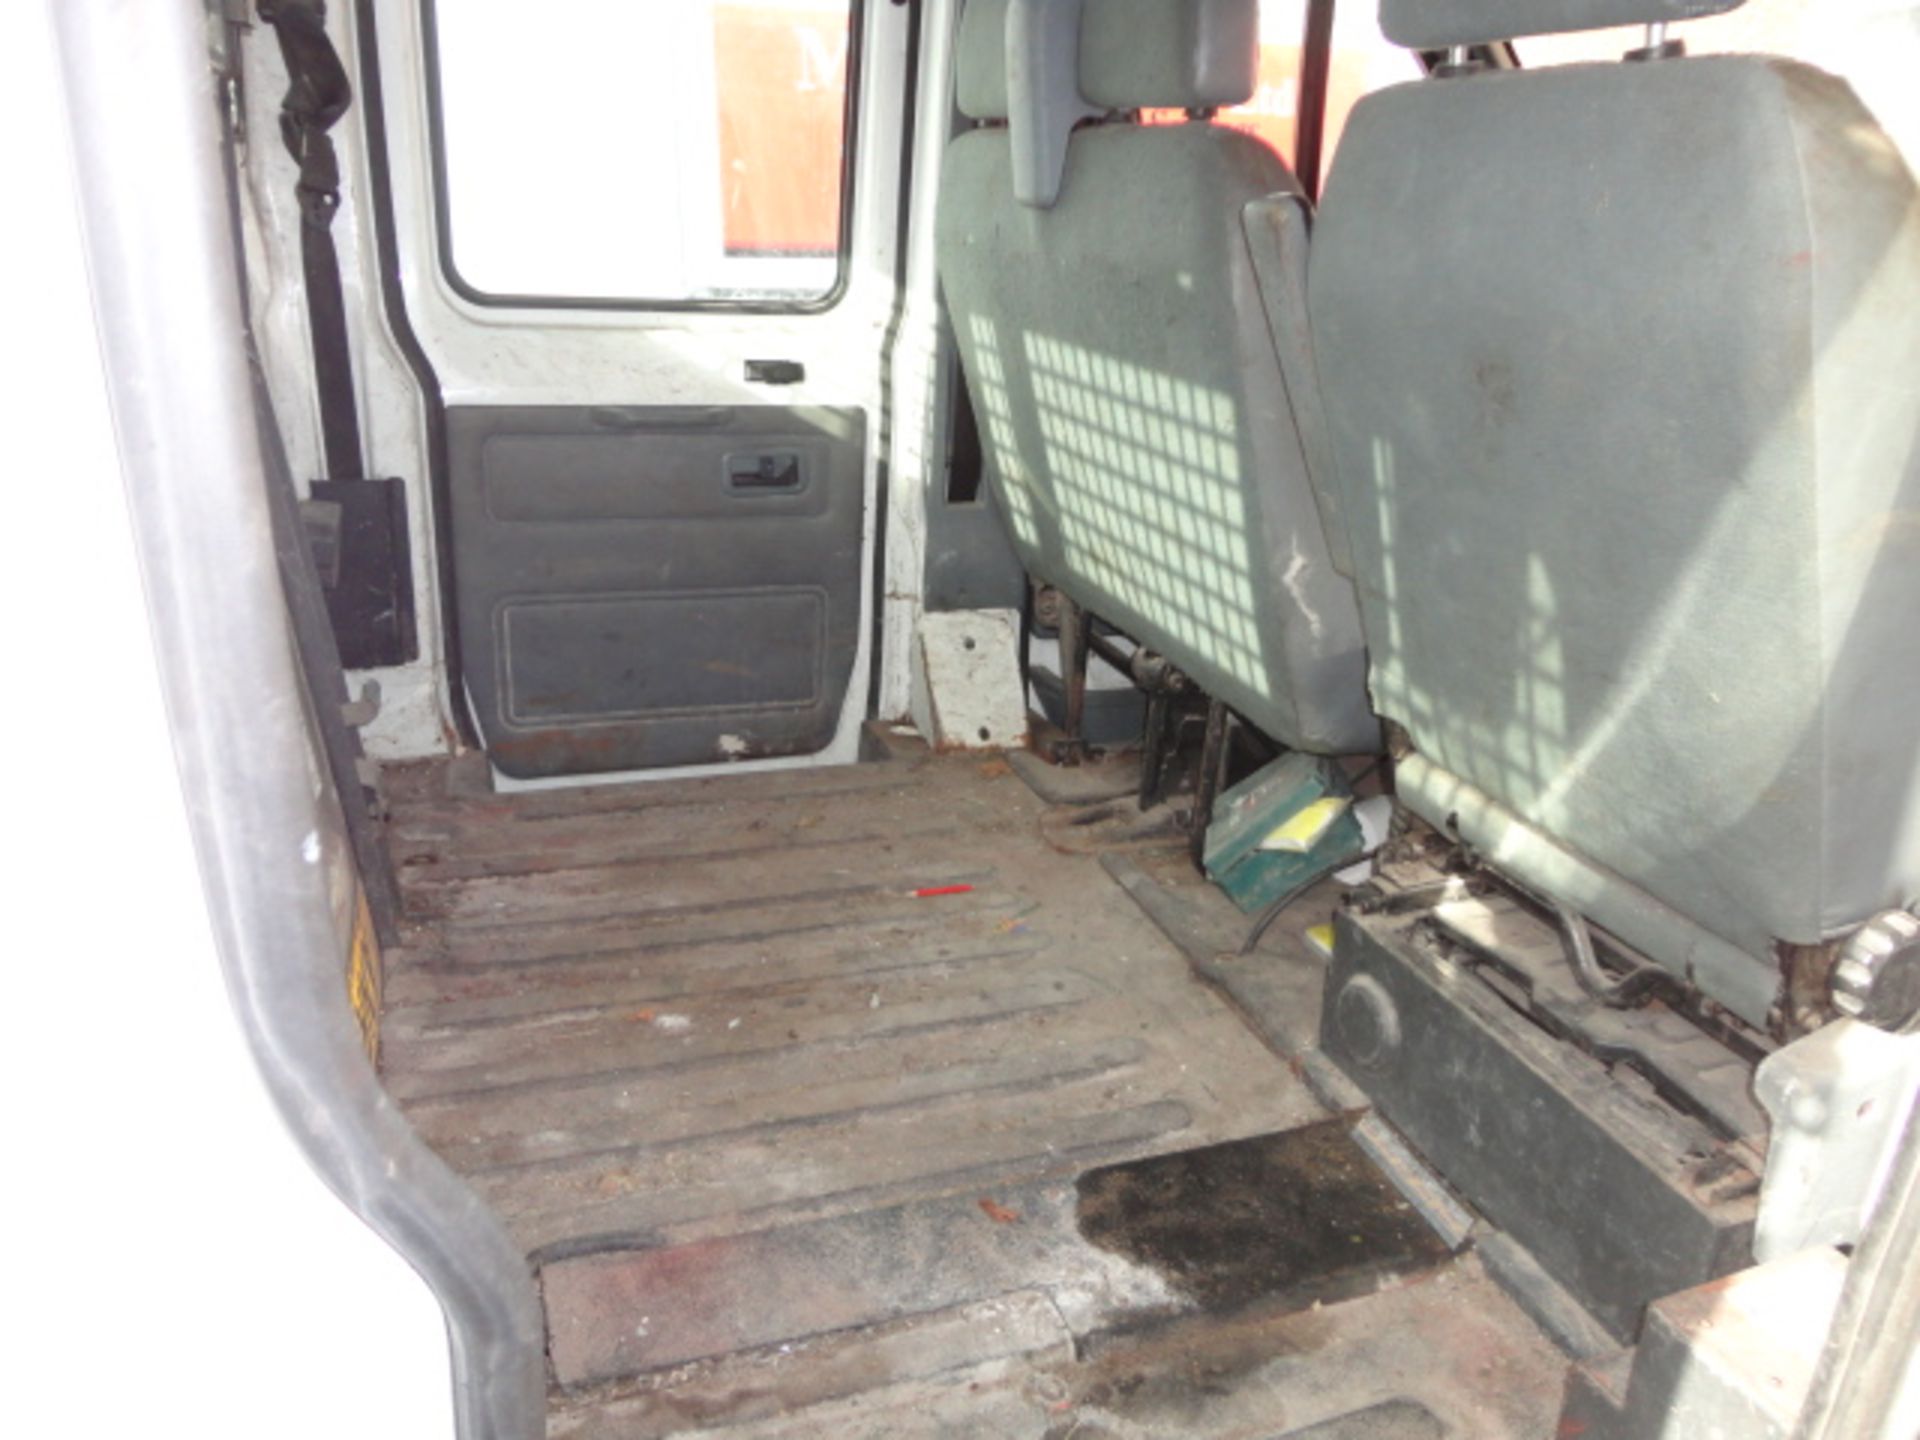 Ford Transit 350 Diesel Double Cab Tipper Truck, r - Image 4 of 5